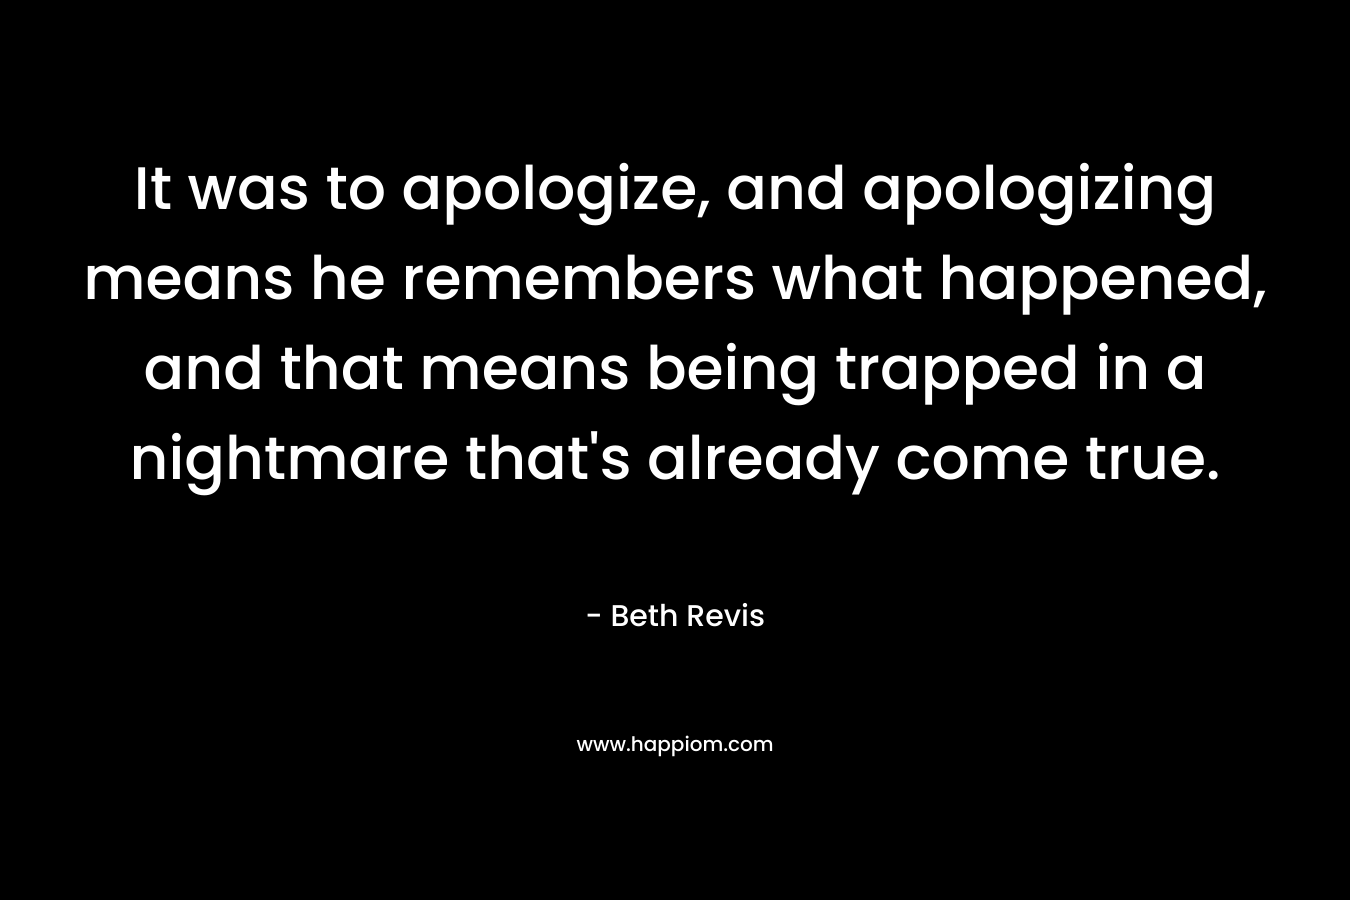 It was to apologize, and apologizing means he remembers what happened, and that means being trapped in a nightmare that's already come true.